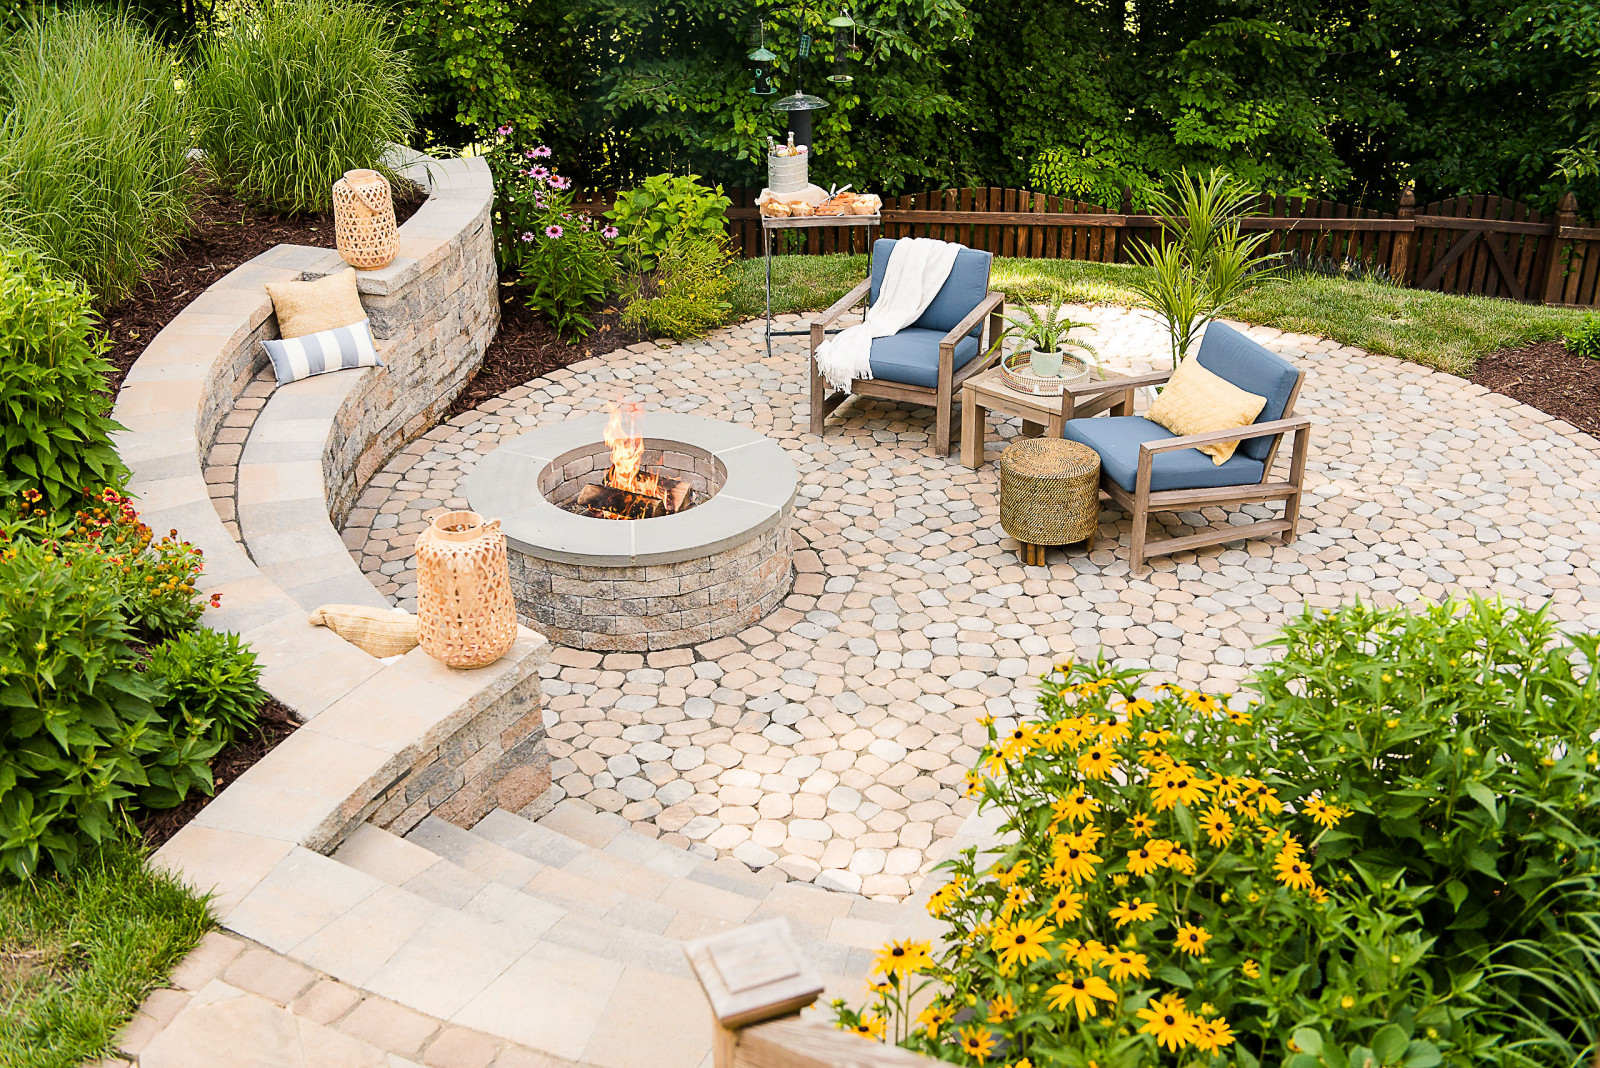 Inspiring Retaining Wall Fire Pit Ideas, How To Build A Fire Pit Seating Wall